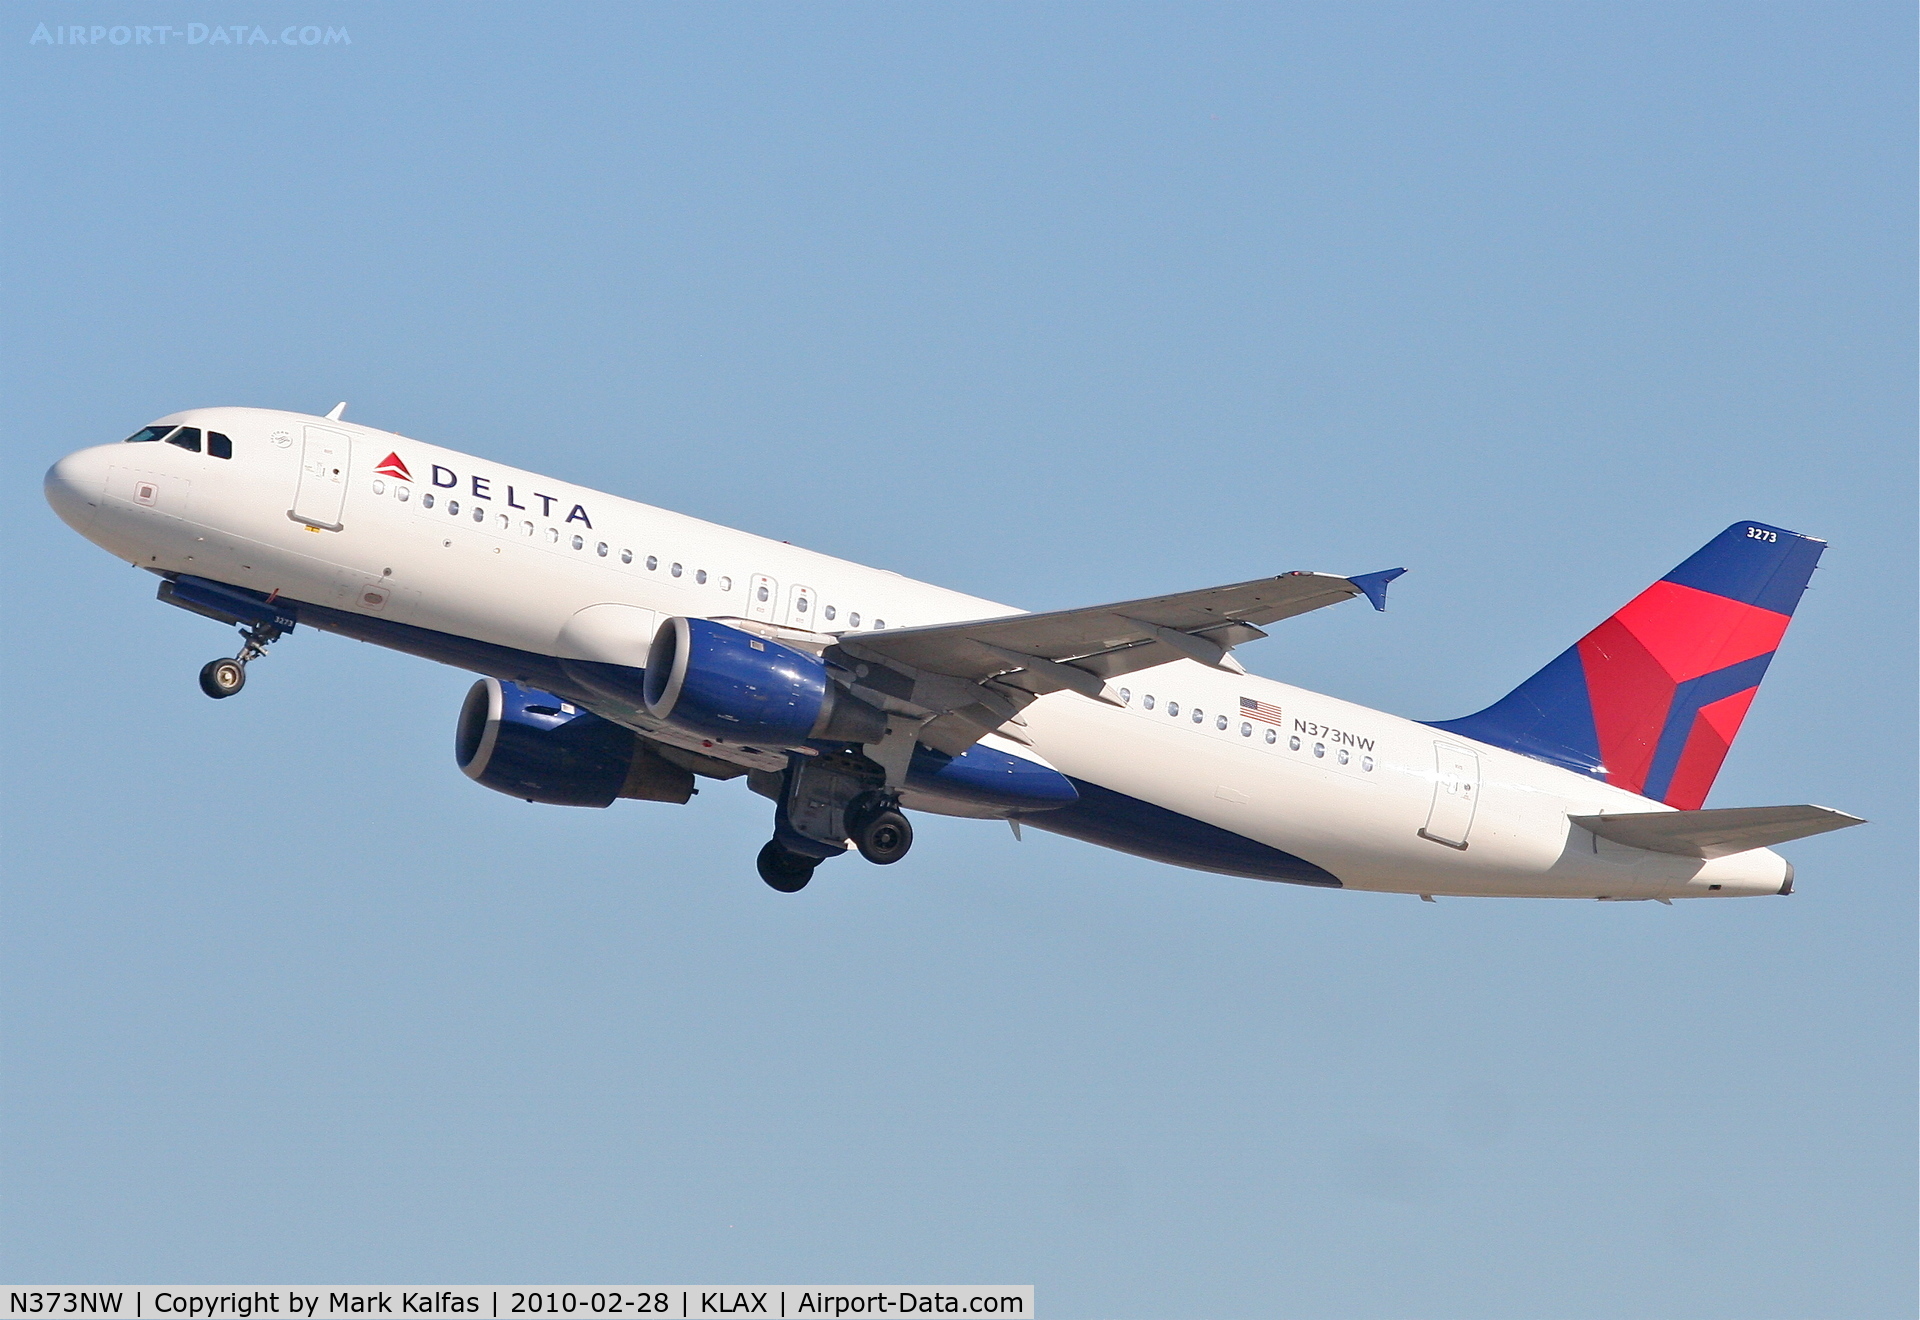 N373NW, 2001 Airbus A320-212 C/N 1641, Delta Airlines Boeing Airbus A320-212, DAL2430 to KDTW 25R departure KLAX.